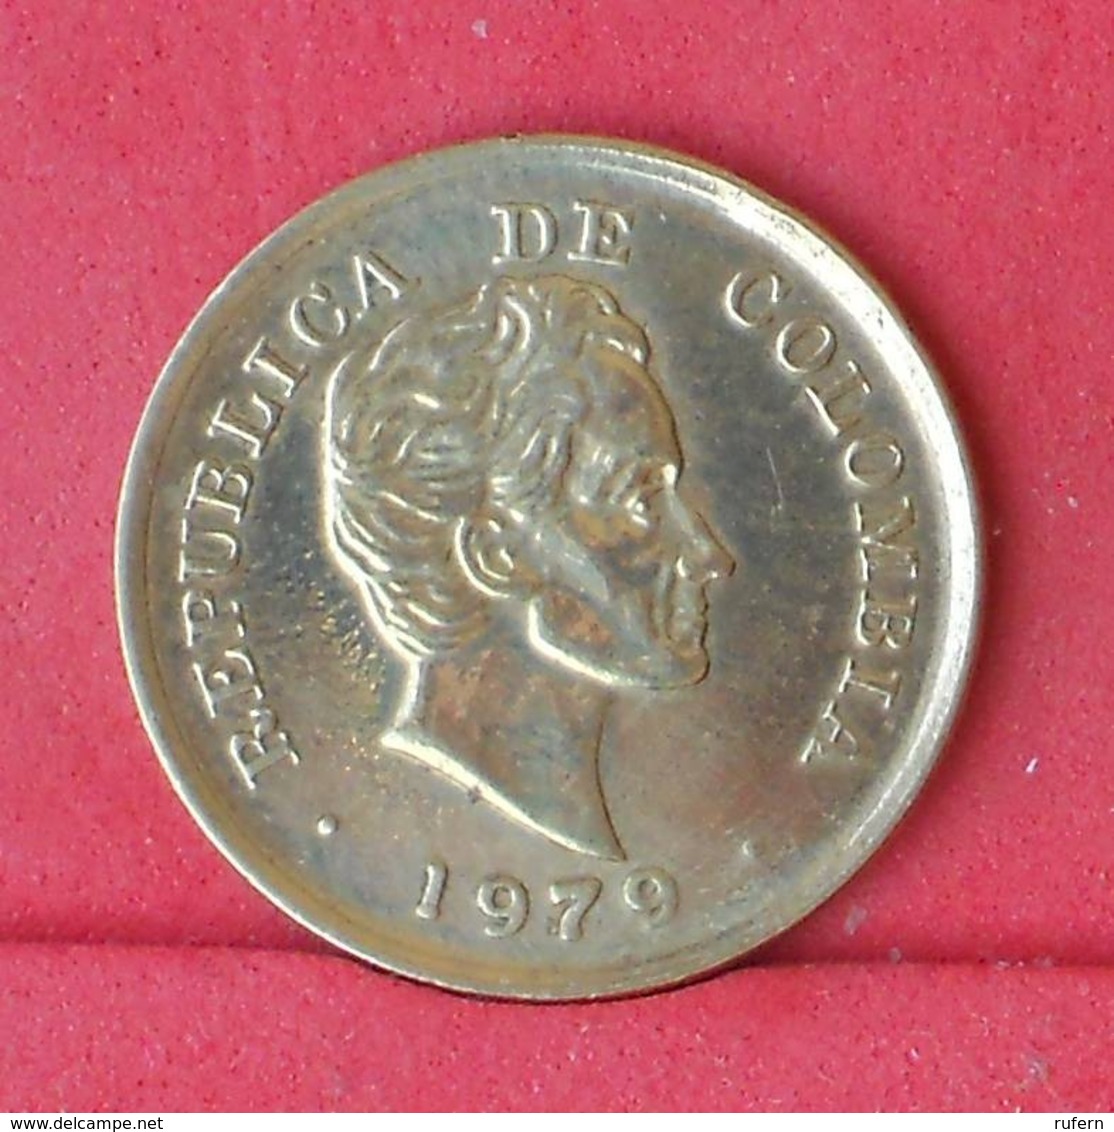 COLOMBIA 25 CENTAVOS 1979 -    KM# 246,2 - (Nº30962) - Colombia